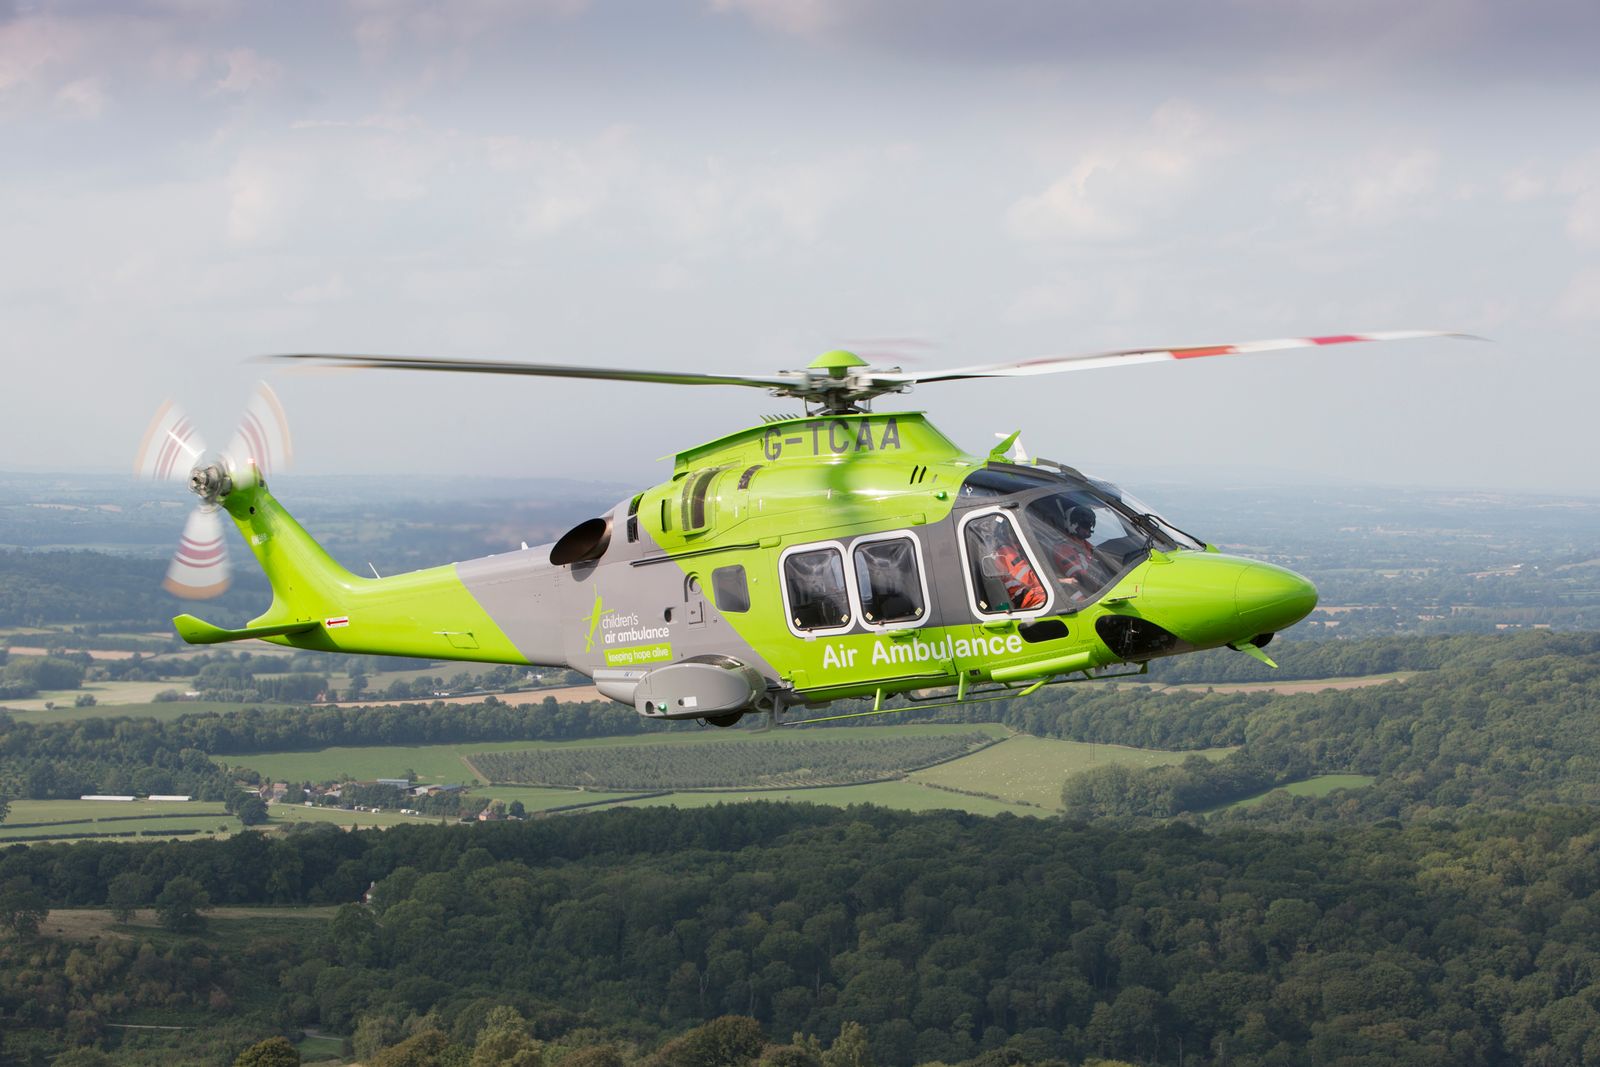 Virtual challenge could help keep the Children’s Air Ambulance flying